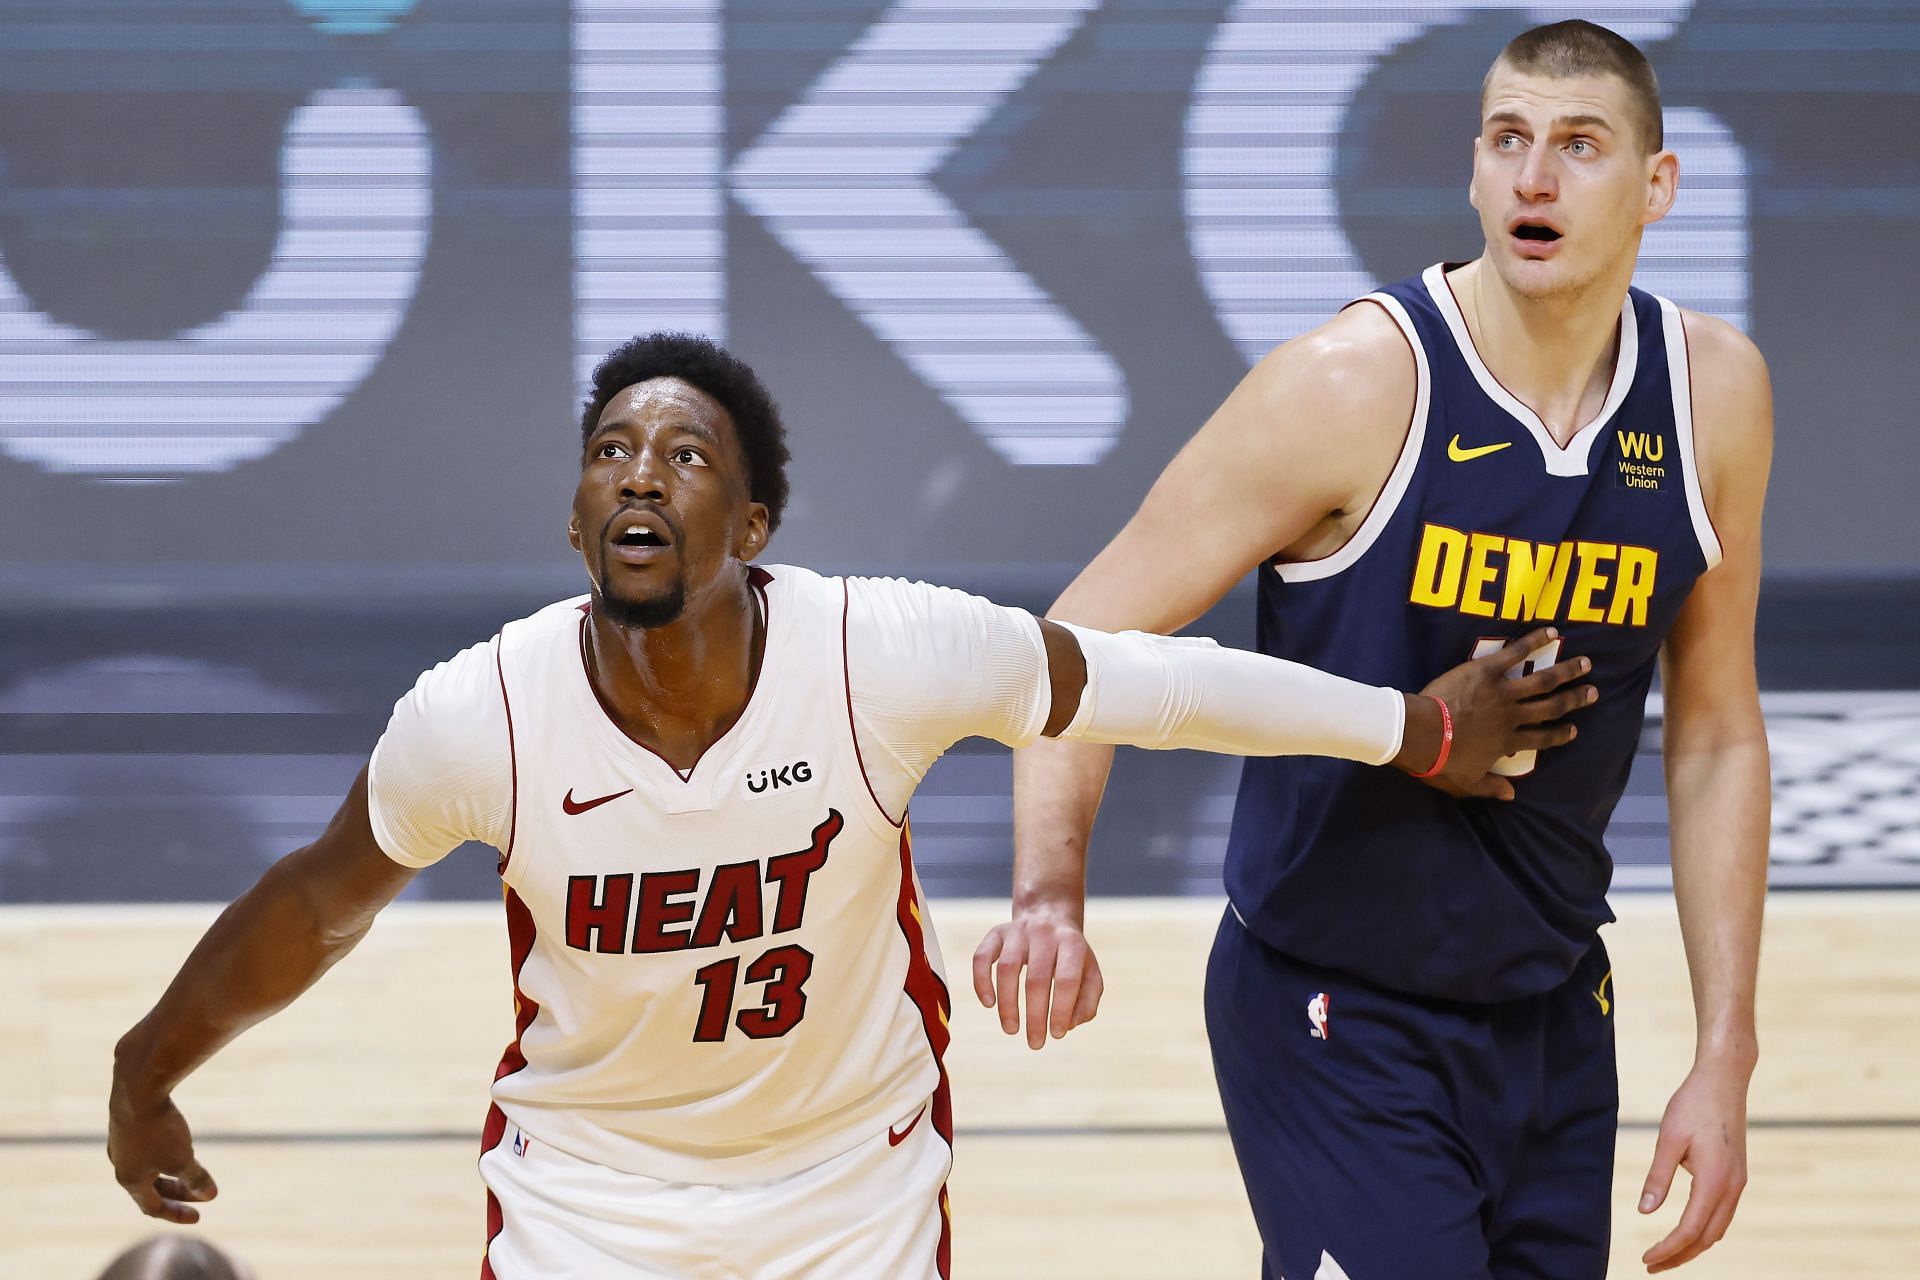 Bam Adebayo #13 of the Miami Heat and Nikola Jokic #15 of the Denver Nuggets look on during the first quarter at American Airlines Arena on January 27, 2021 in Miami, Florida.